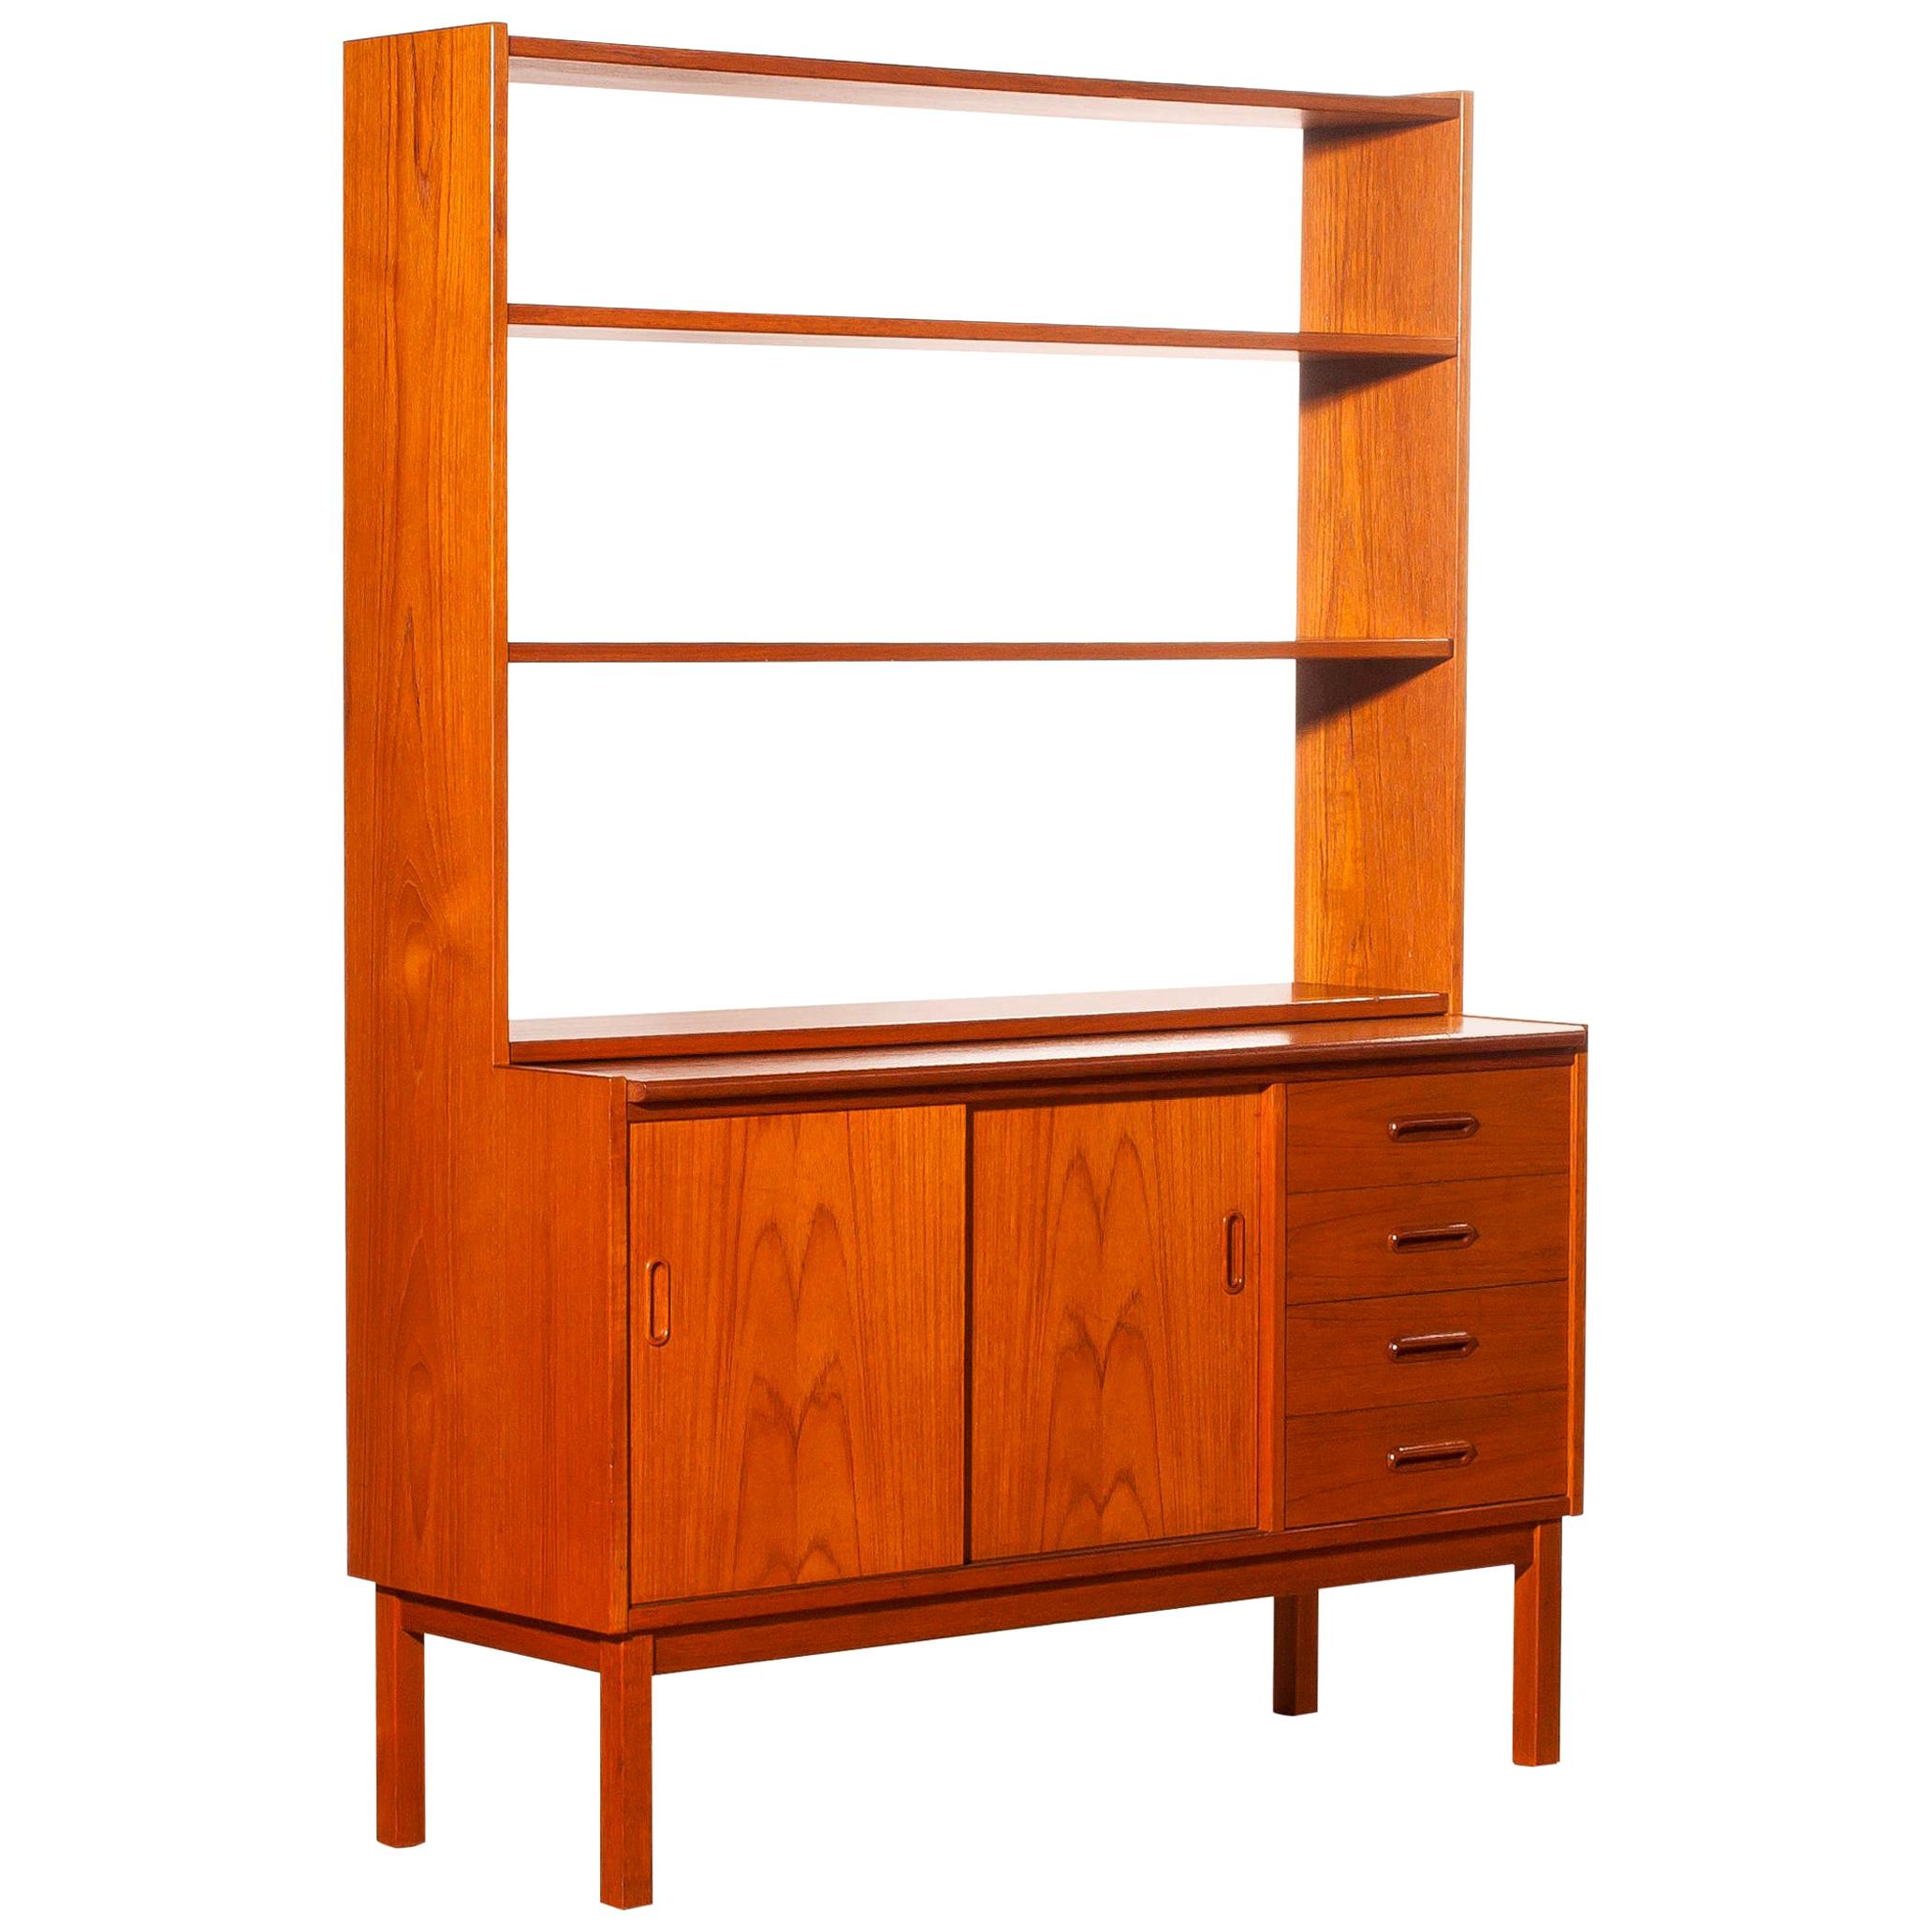 1960s, Teak Bookcase with Slid Able Writing or Working Space from Sweden